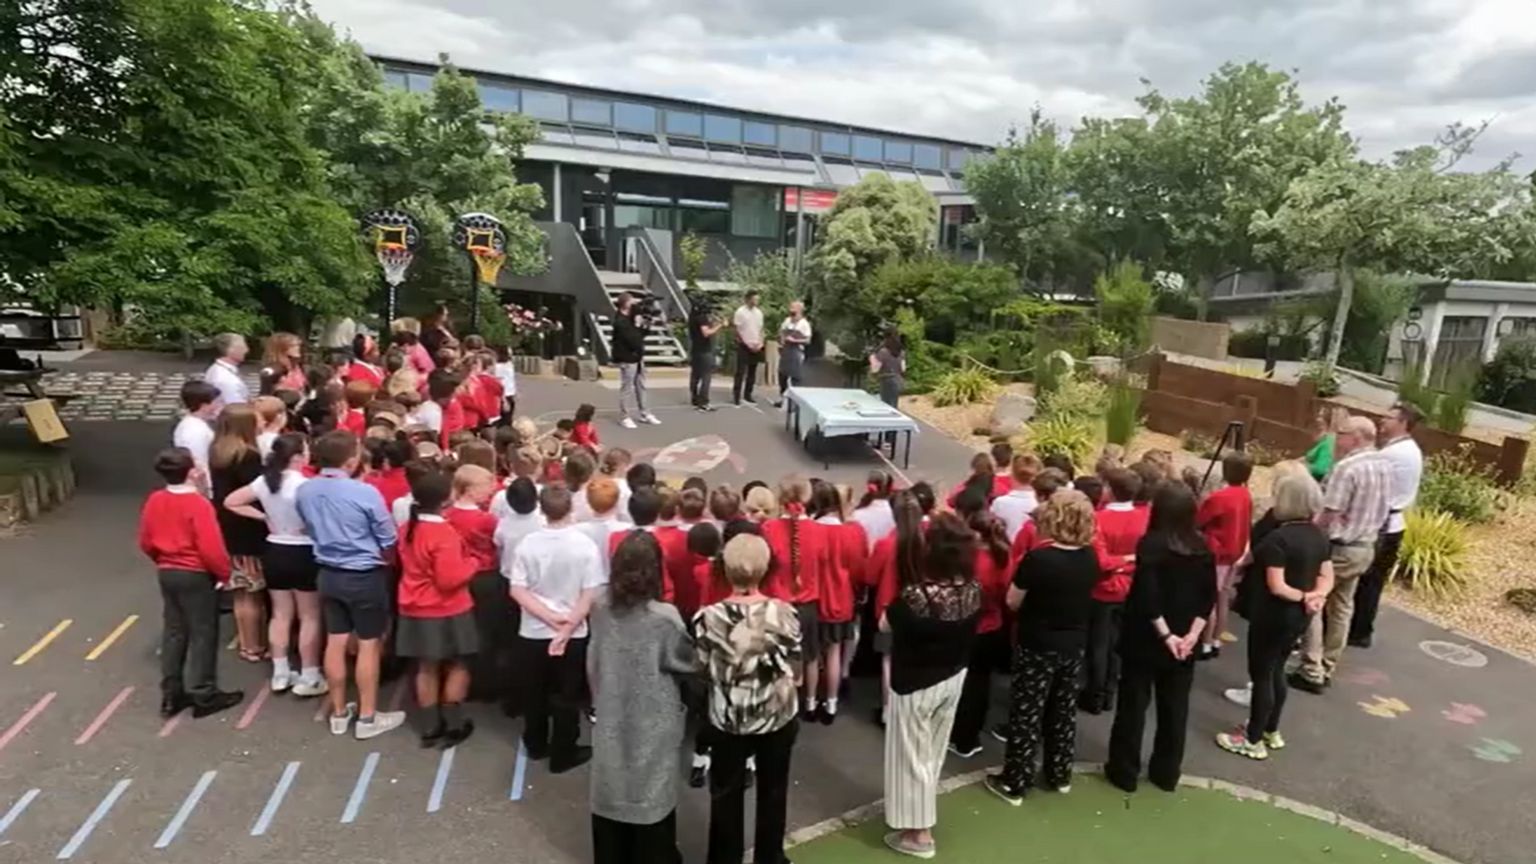 A group of Pokesdown Primary School children and teachers standing in a semi-circle around Mr Ball receiving his award